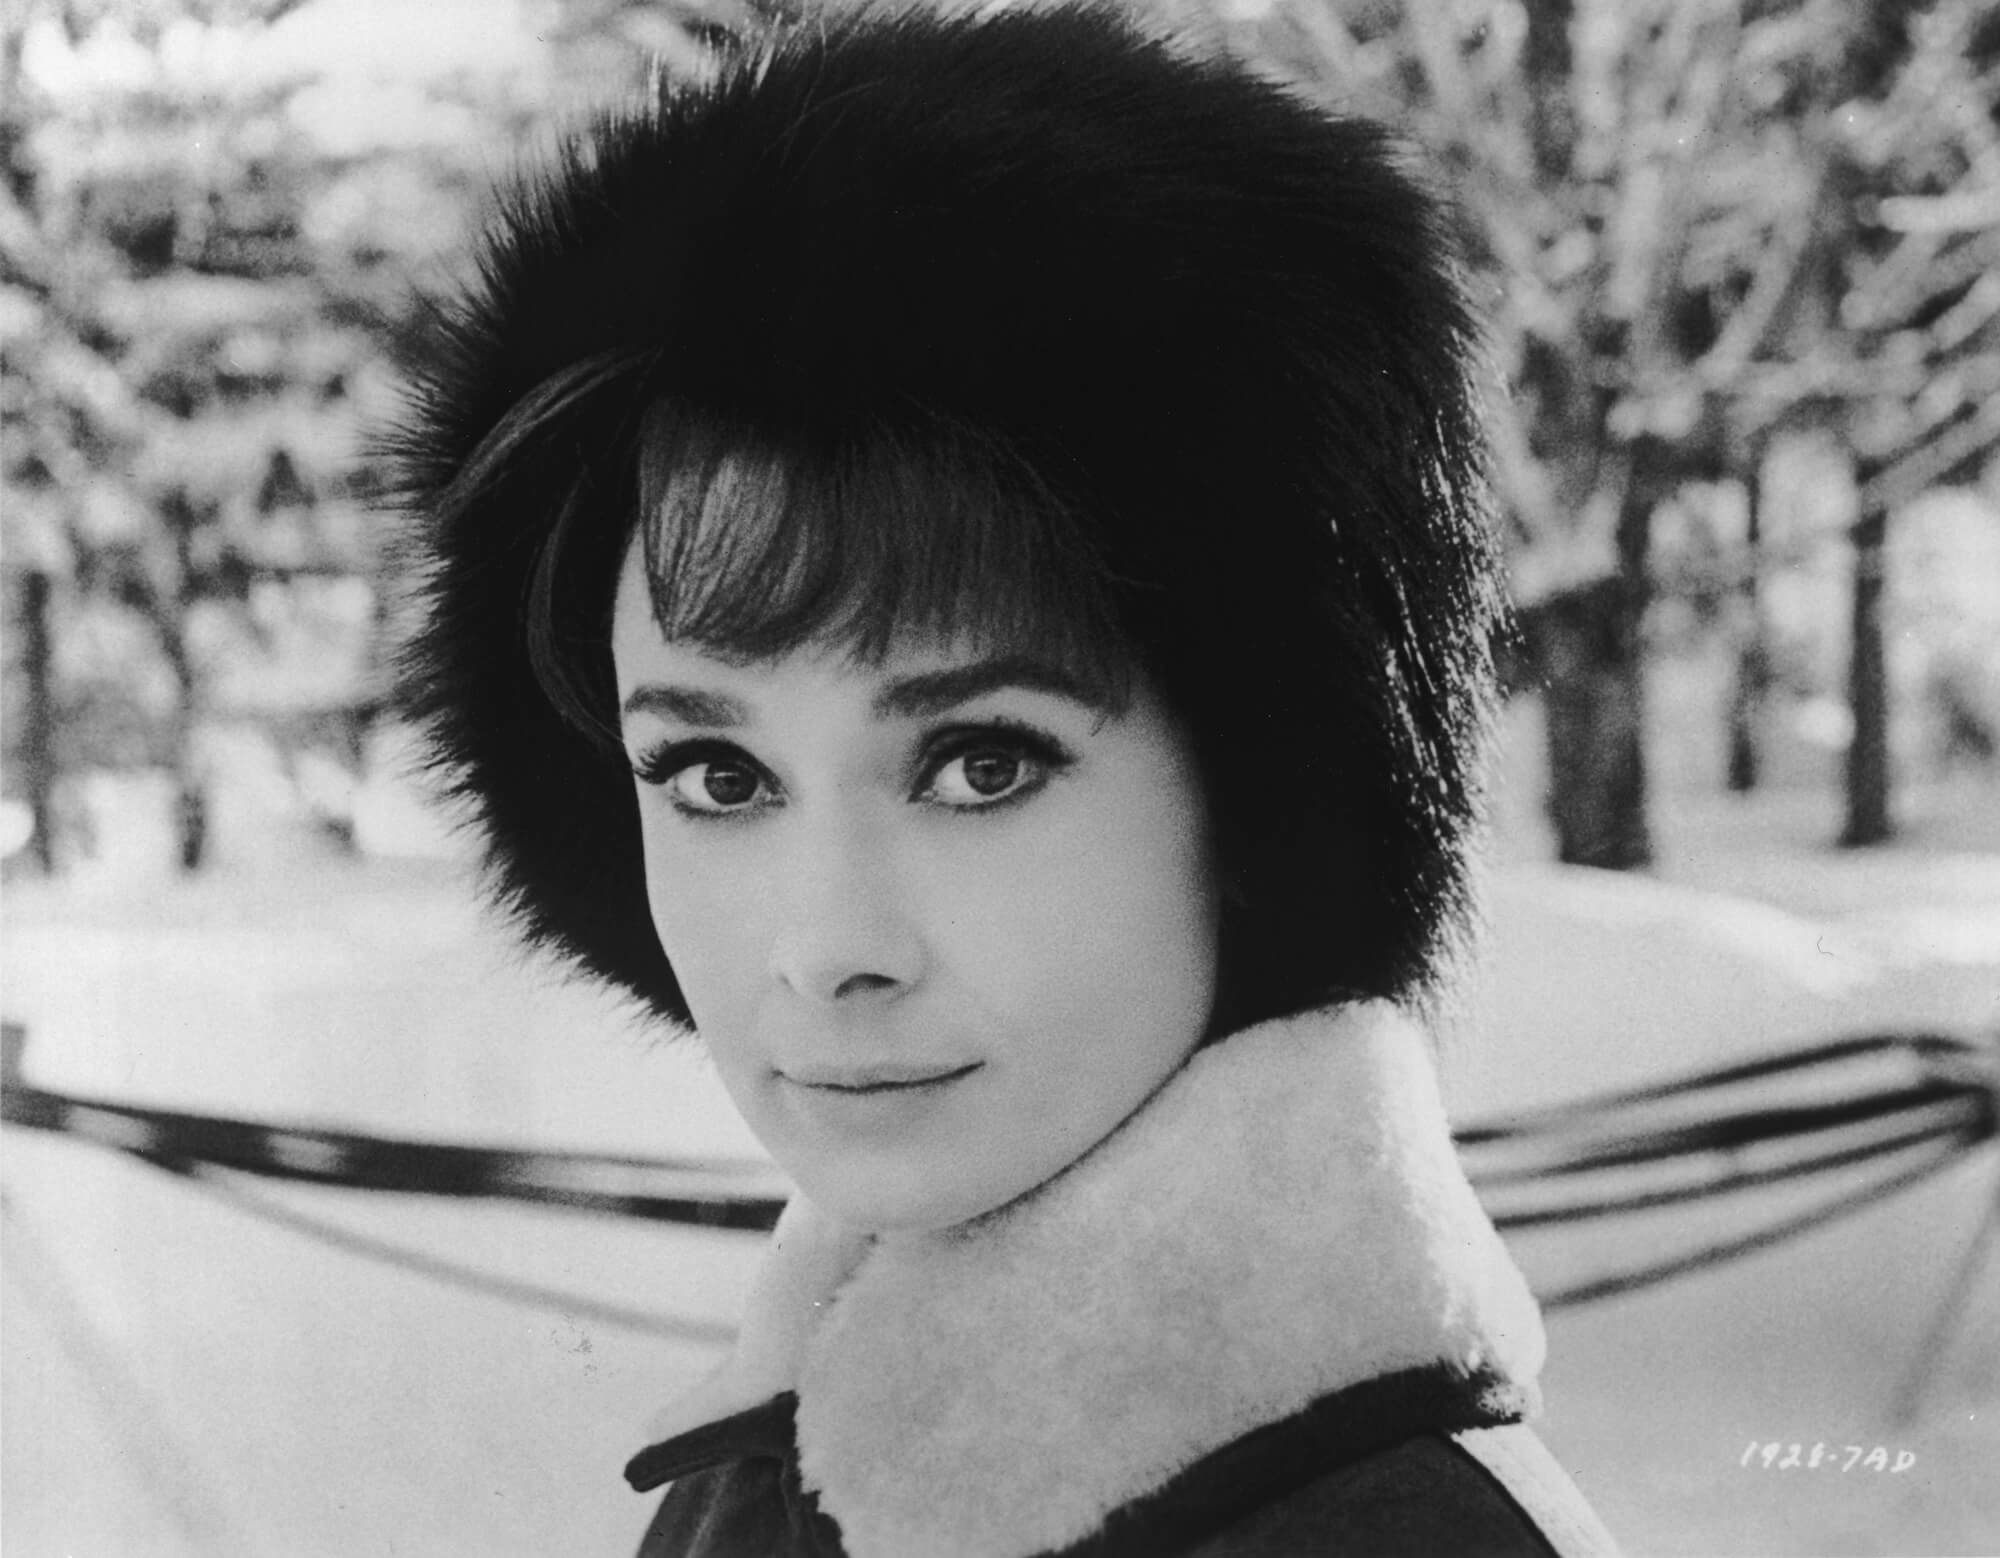 A black-and-white photo of Audrey Hepburn